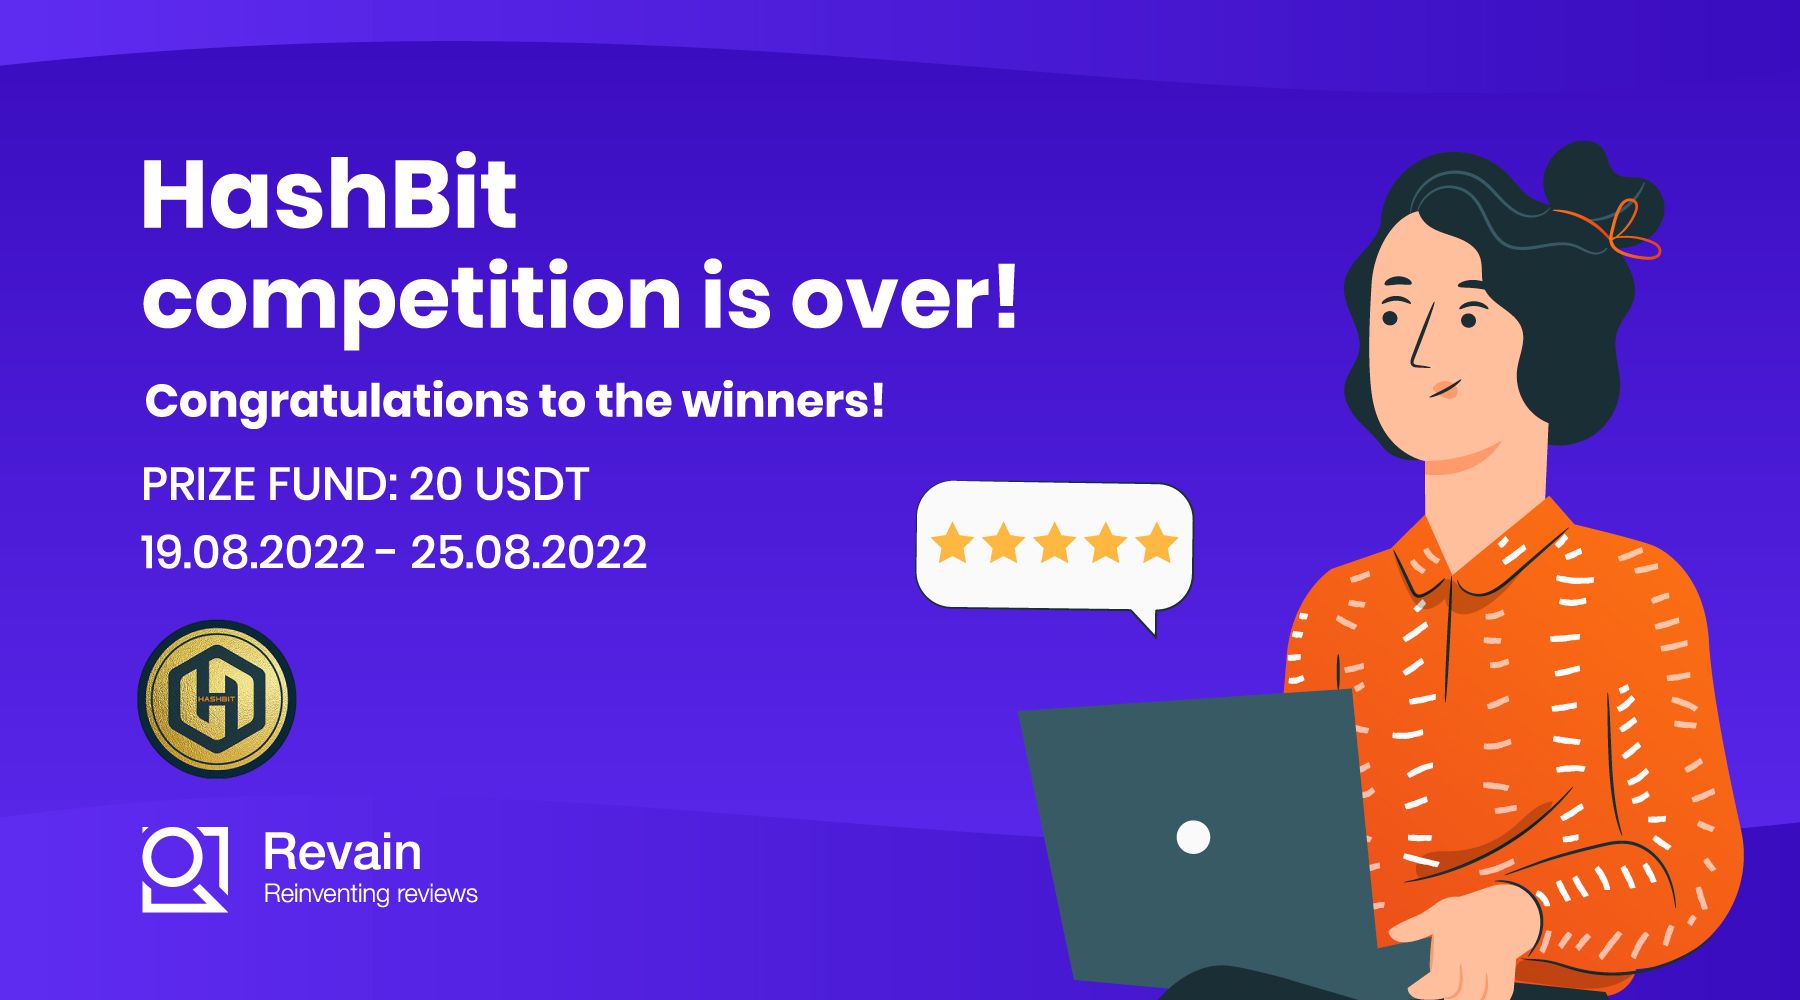 Article Review competition with HashBit & Revain has come to an end!